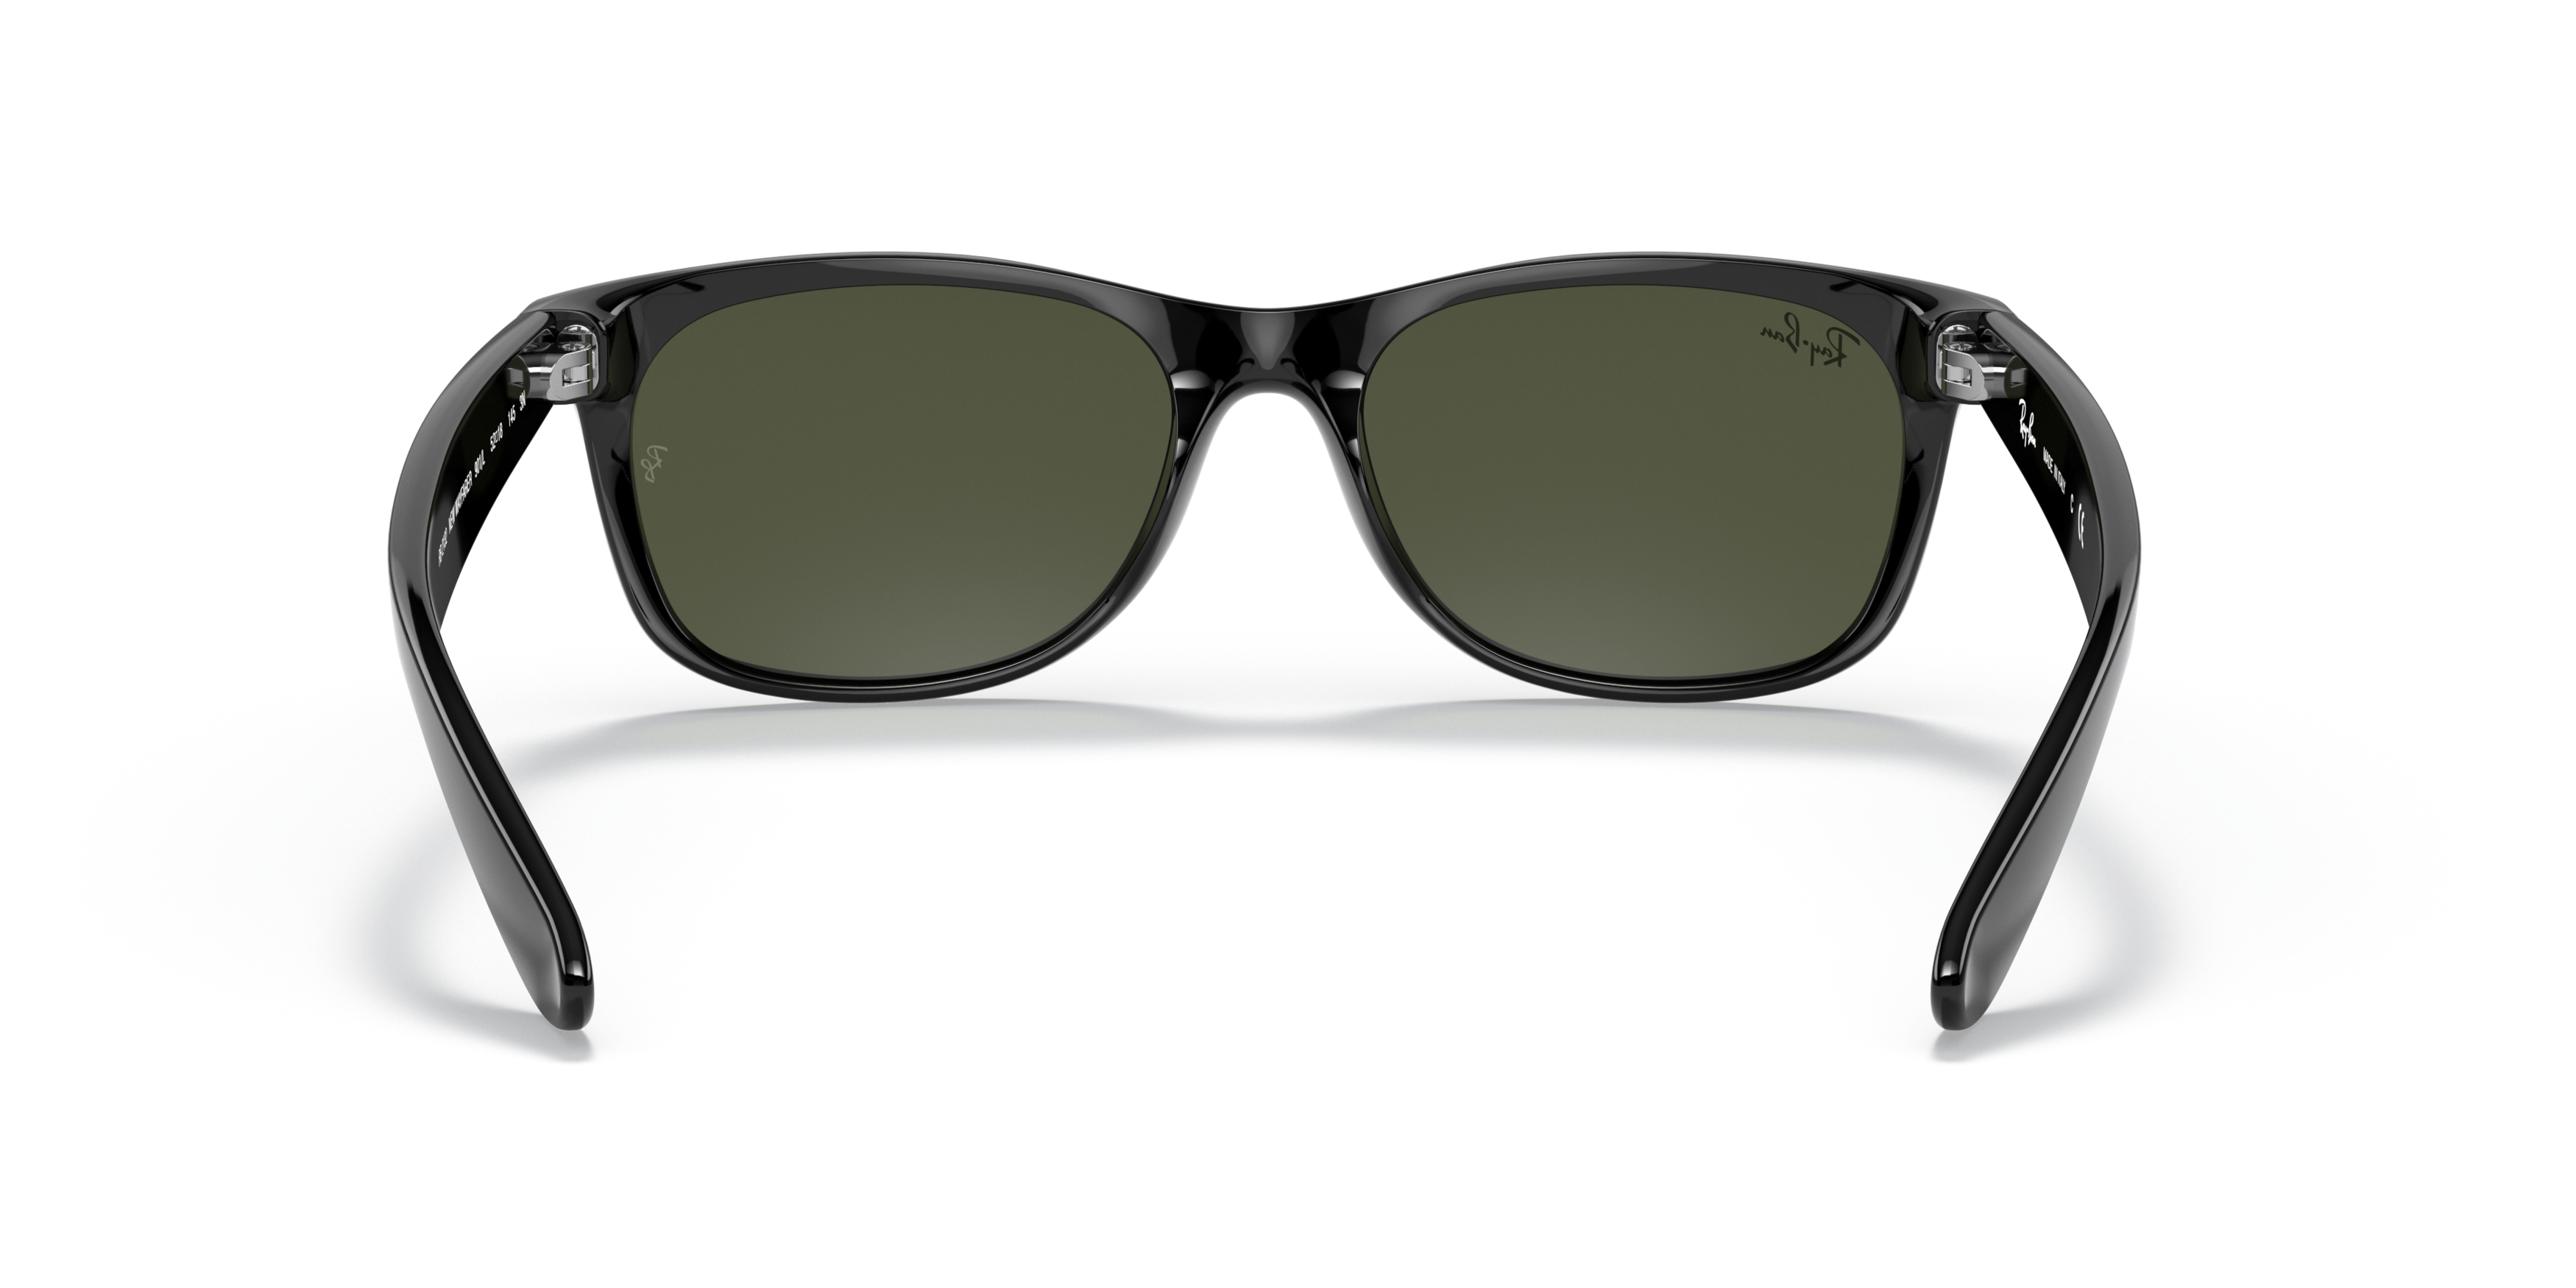 [products.image.detail02] Ray-Ban New Wayfarer RB2132 901L